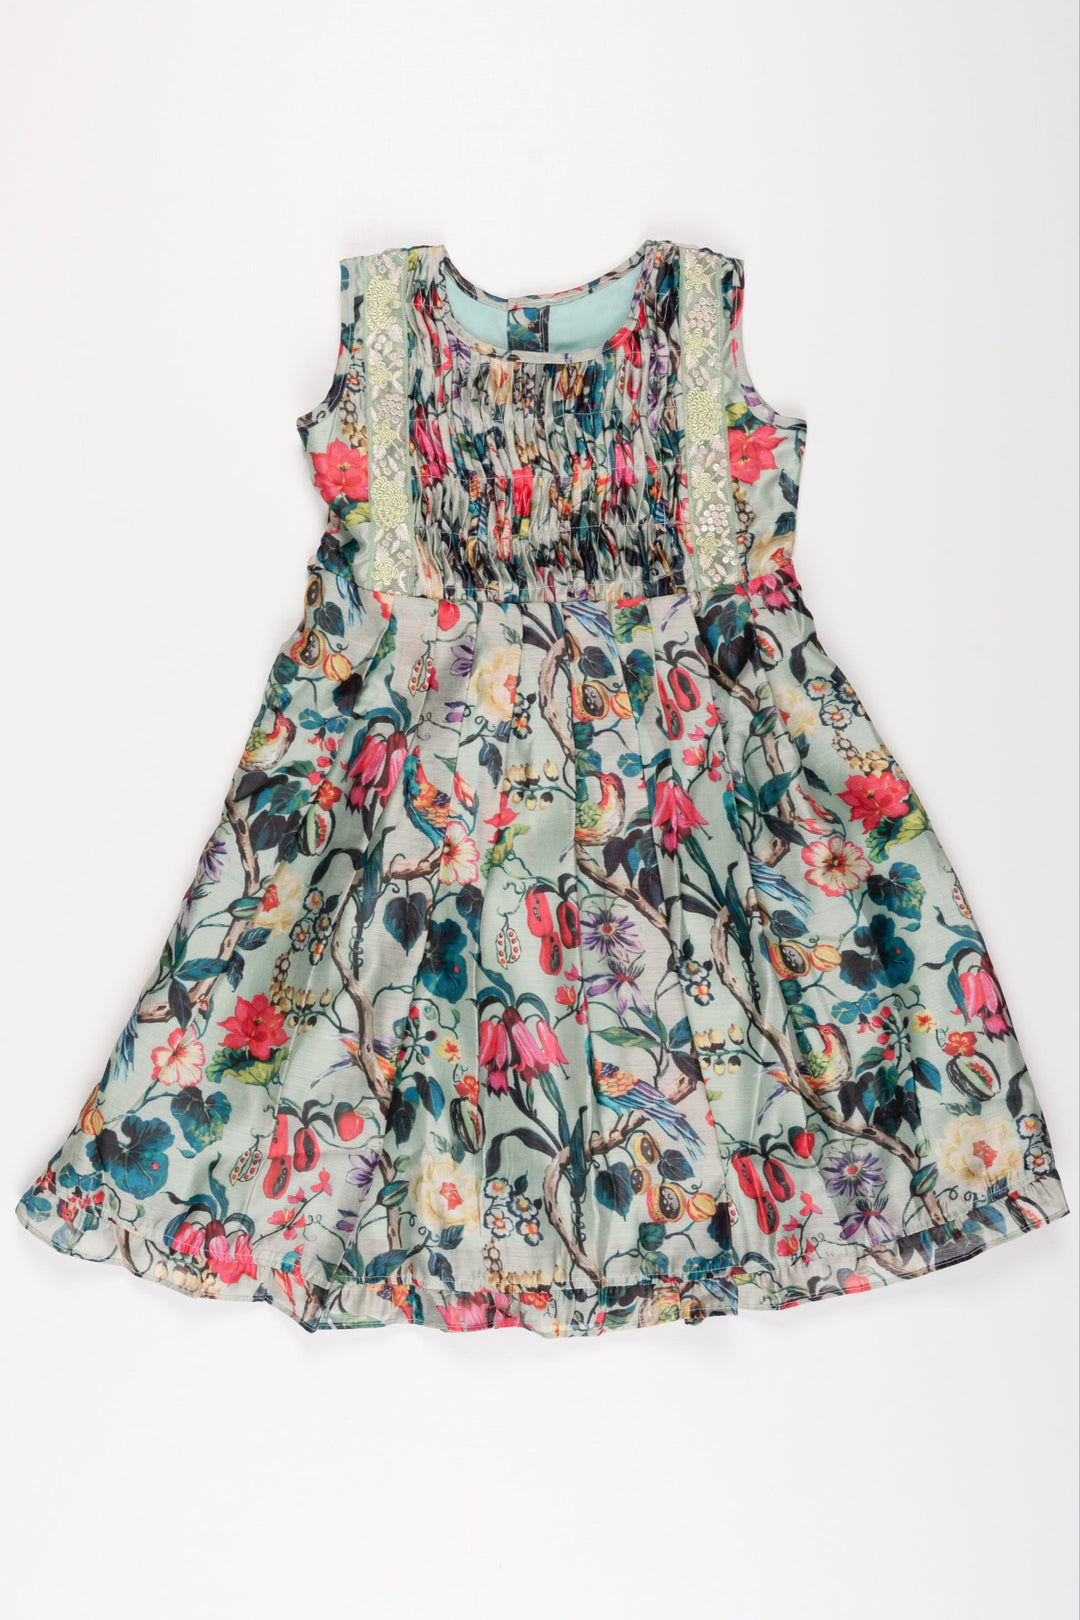 The Nesavu Girls Cotton Frock Tropical Paradise Cotton Frock: Exotic Birds and Floral Print with Embellishments for Girls Nesavu 12 (3M) / Green GFC1194C-12 Girls' Exotic Bird Print Dress | Floral Embellished Cotton Frock | The Nesavu